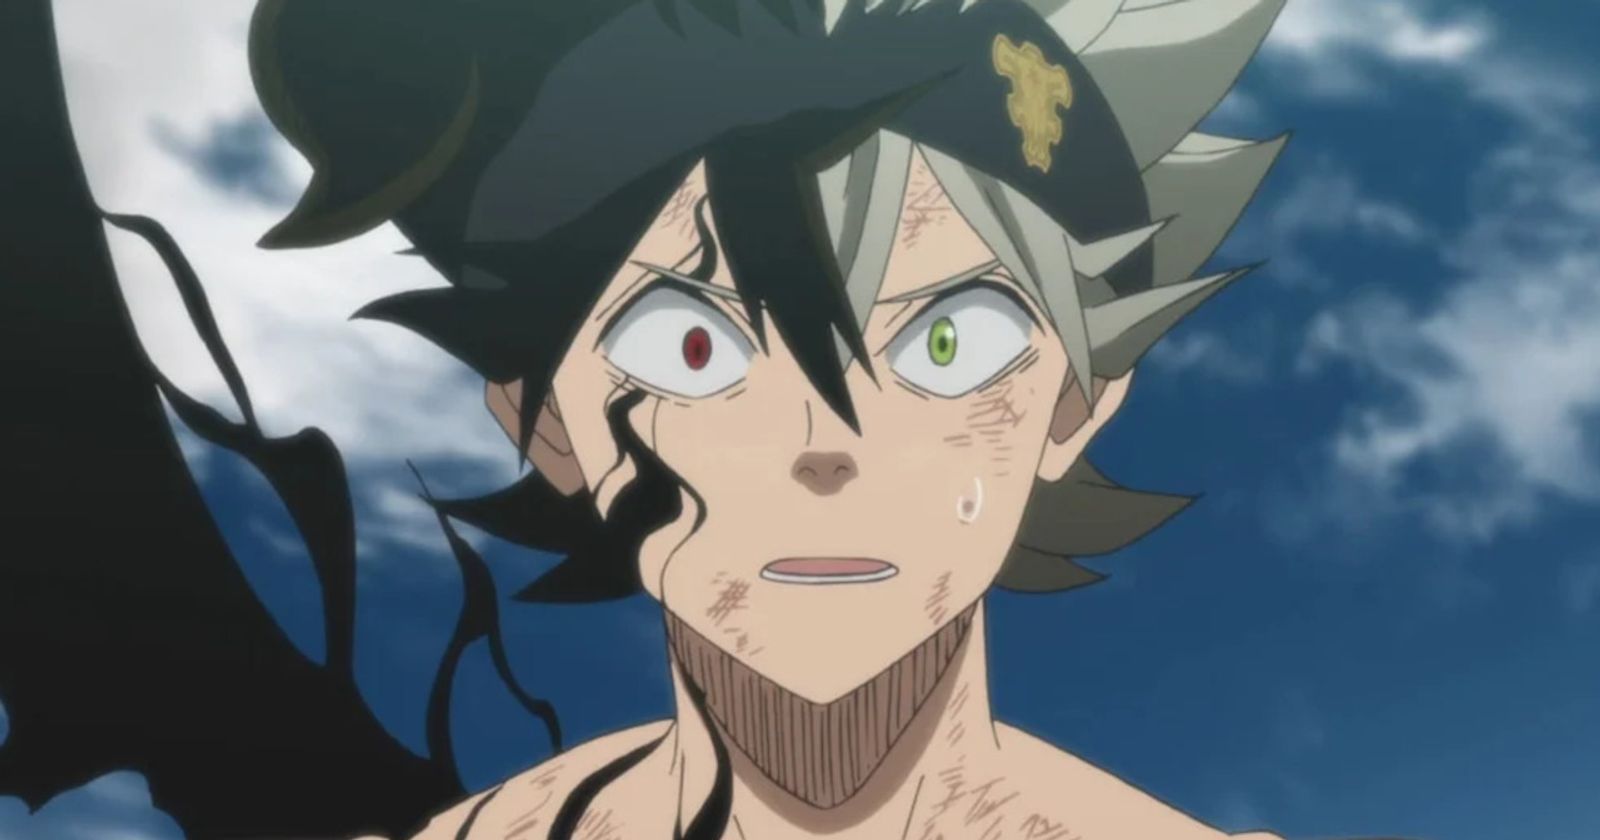 Black Clover: Sword of the Wizard King is everything fans needed and more!  - Hindustan Times